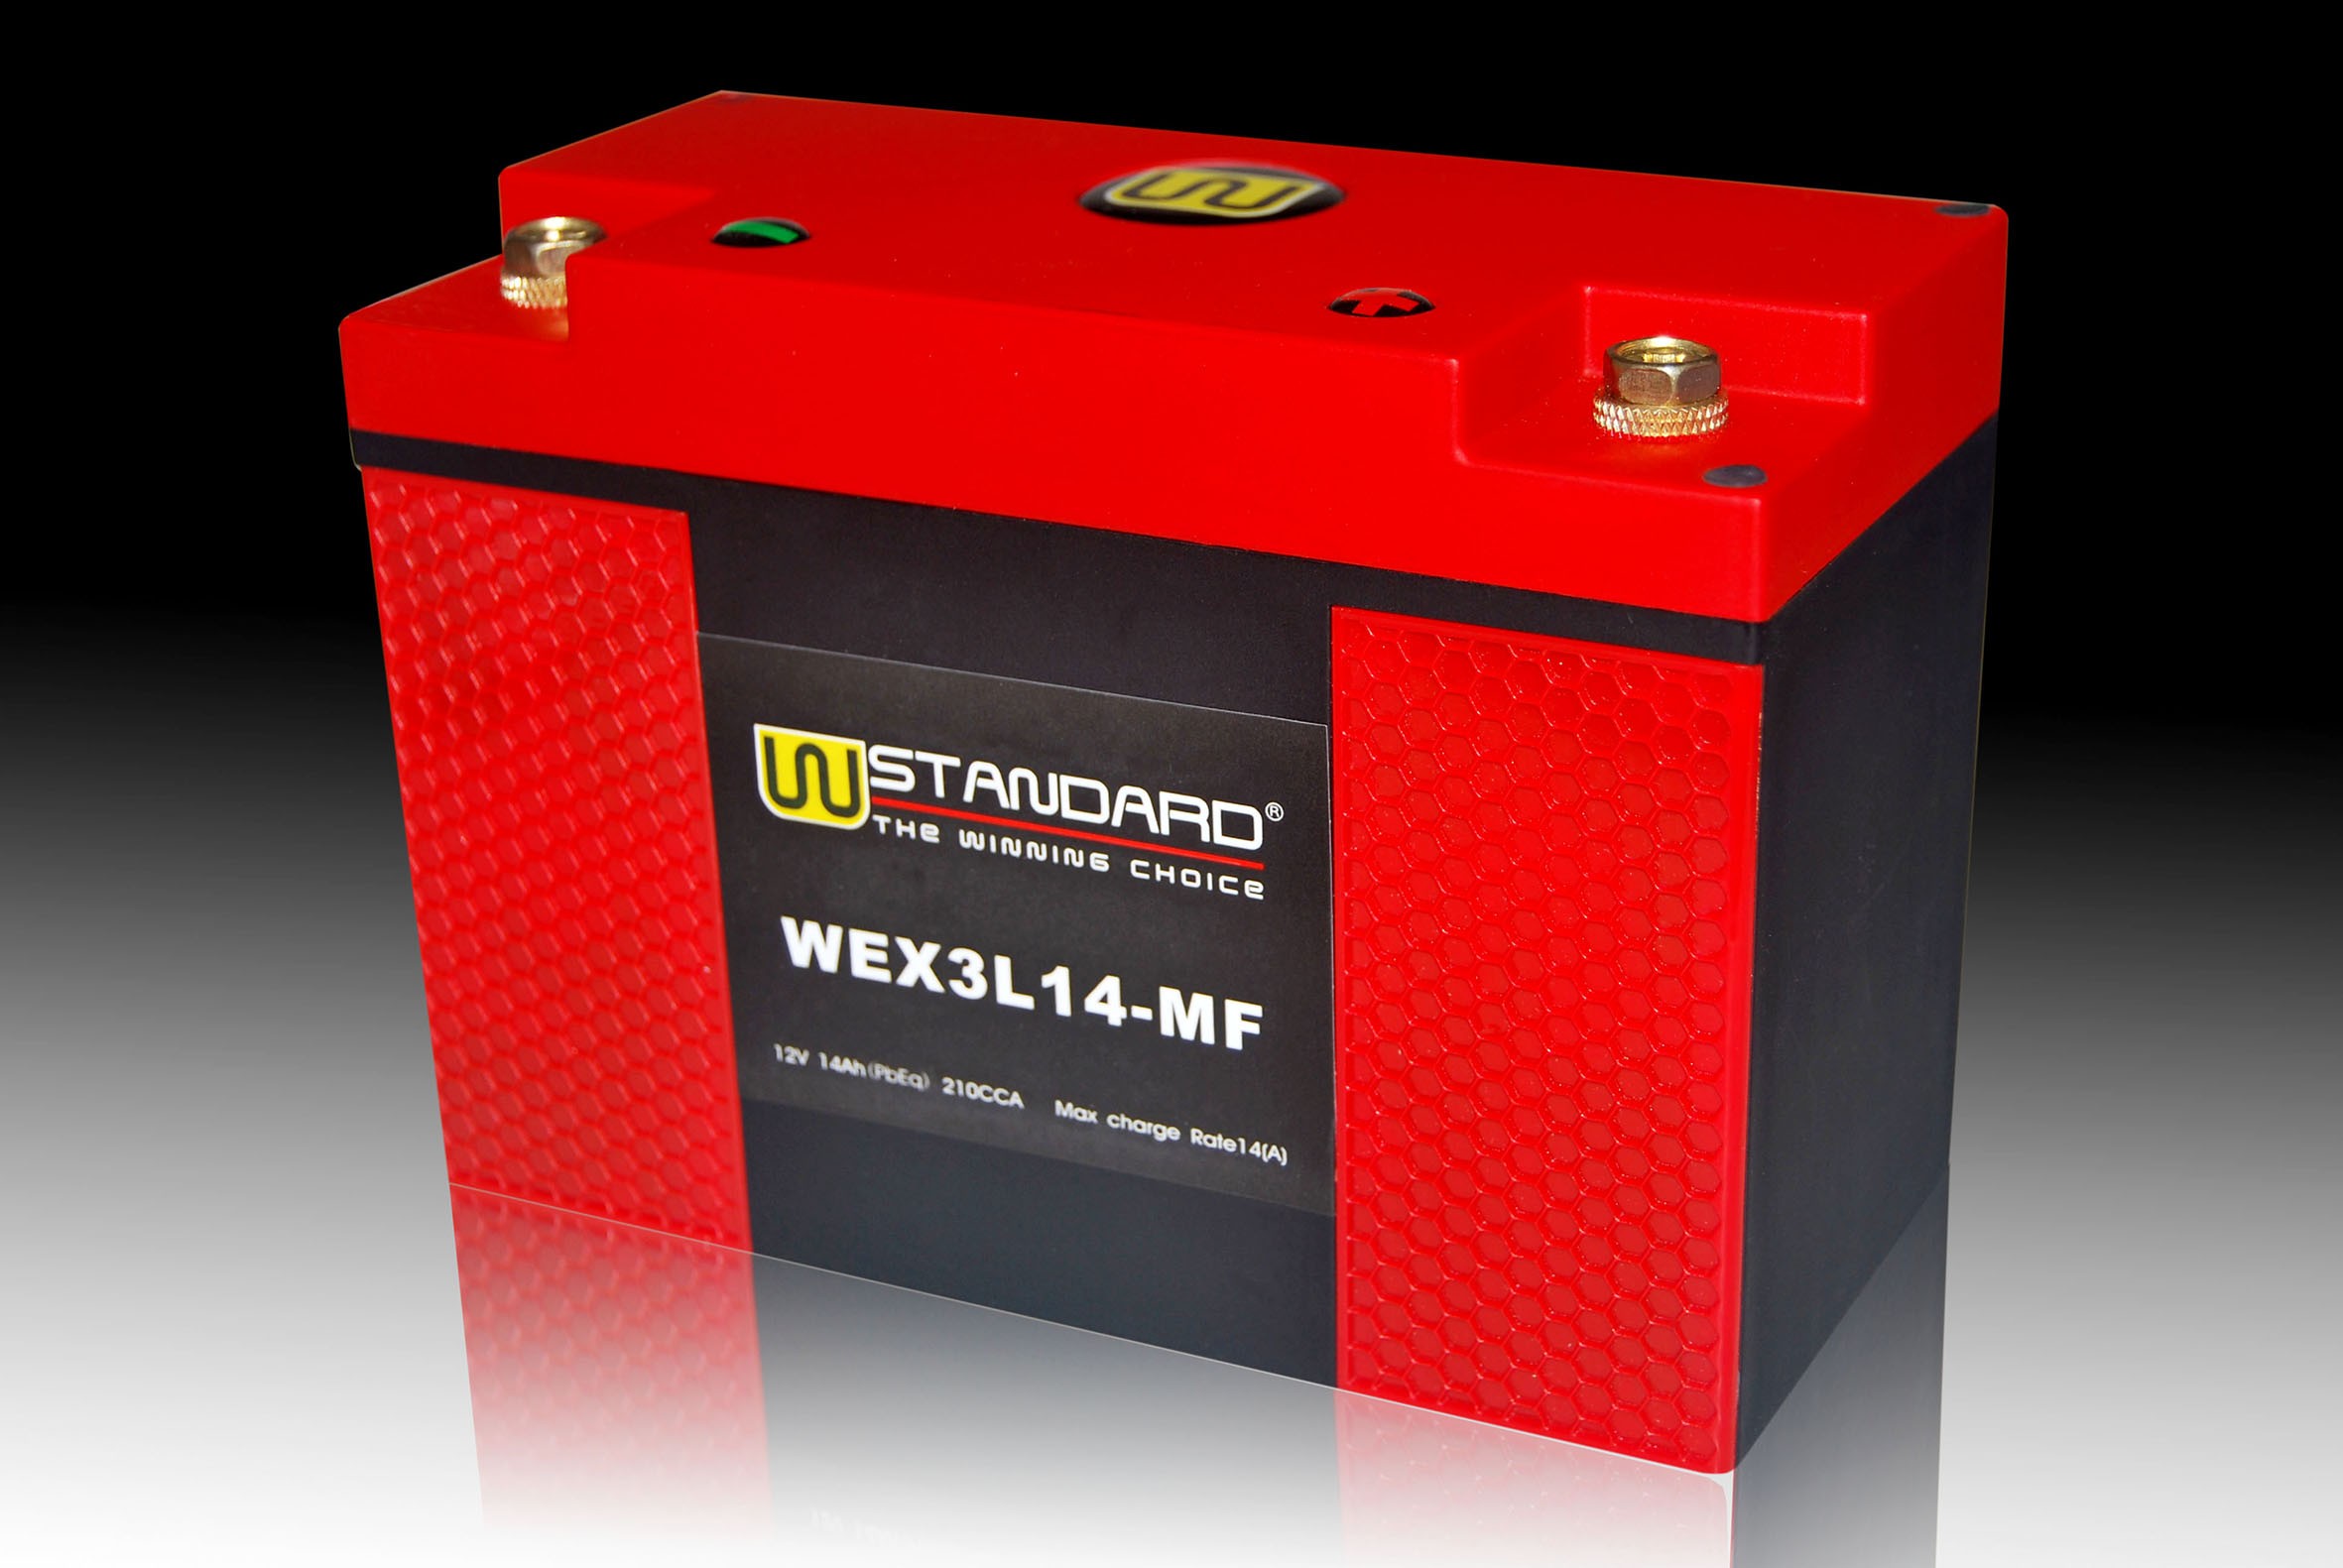 04-W-STANDARD Motorcycle lithium battery WEX3L14-MF Start the power supply 14Ah